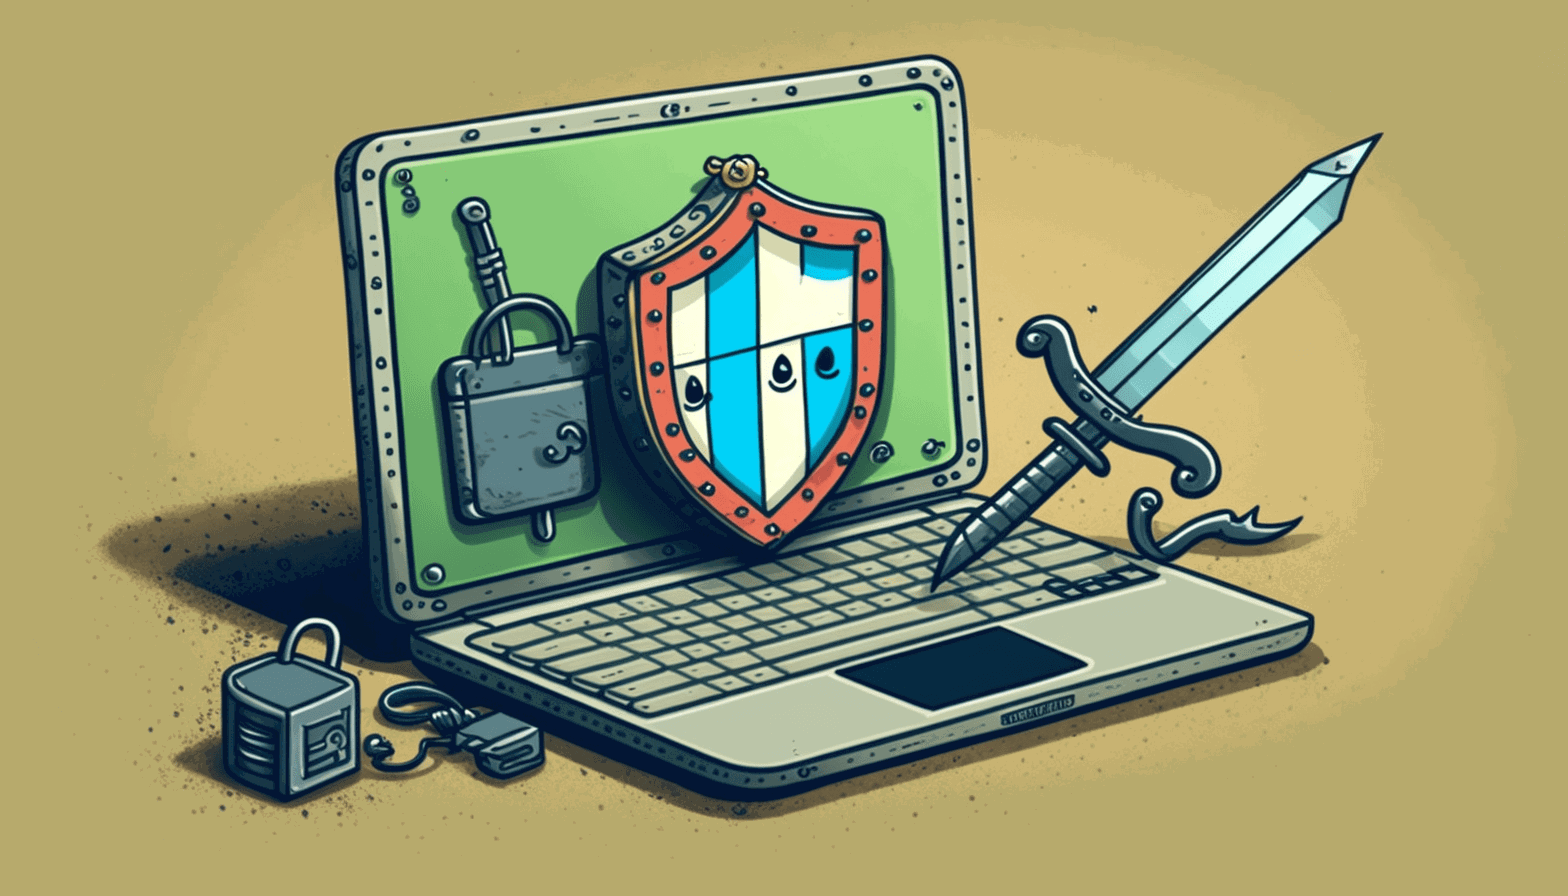 A cartoon illustration of a laptop with a lock on it, with a shield and sword representing cybersecurity, in the background.